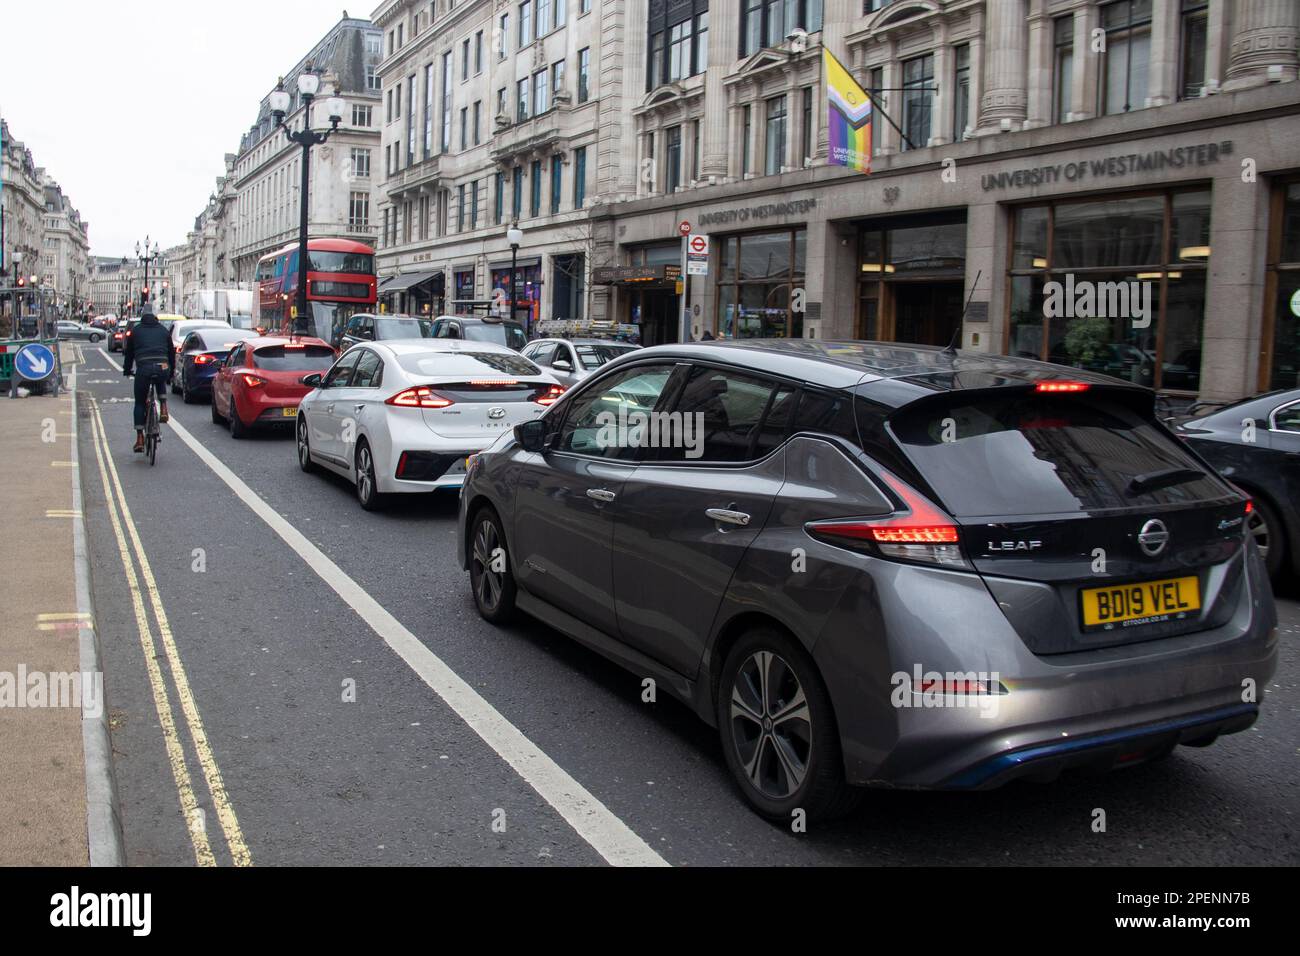 London, UK. 15th Mar, 2023. London, UK - March 15, 2023: As the majority of underground services in London were closed, heavy traffic and crowded buses were experienced throughout the city. Credit: Sinai Noor/Alamy Live News Stock Photo